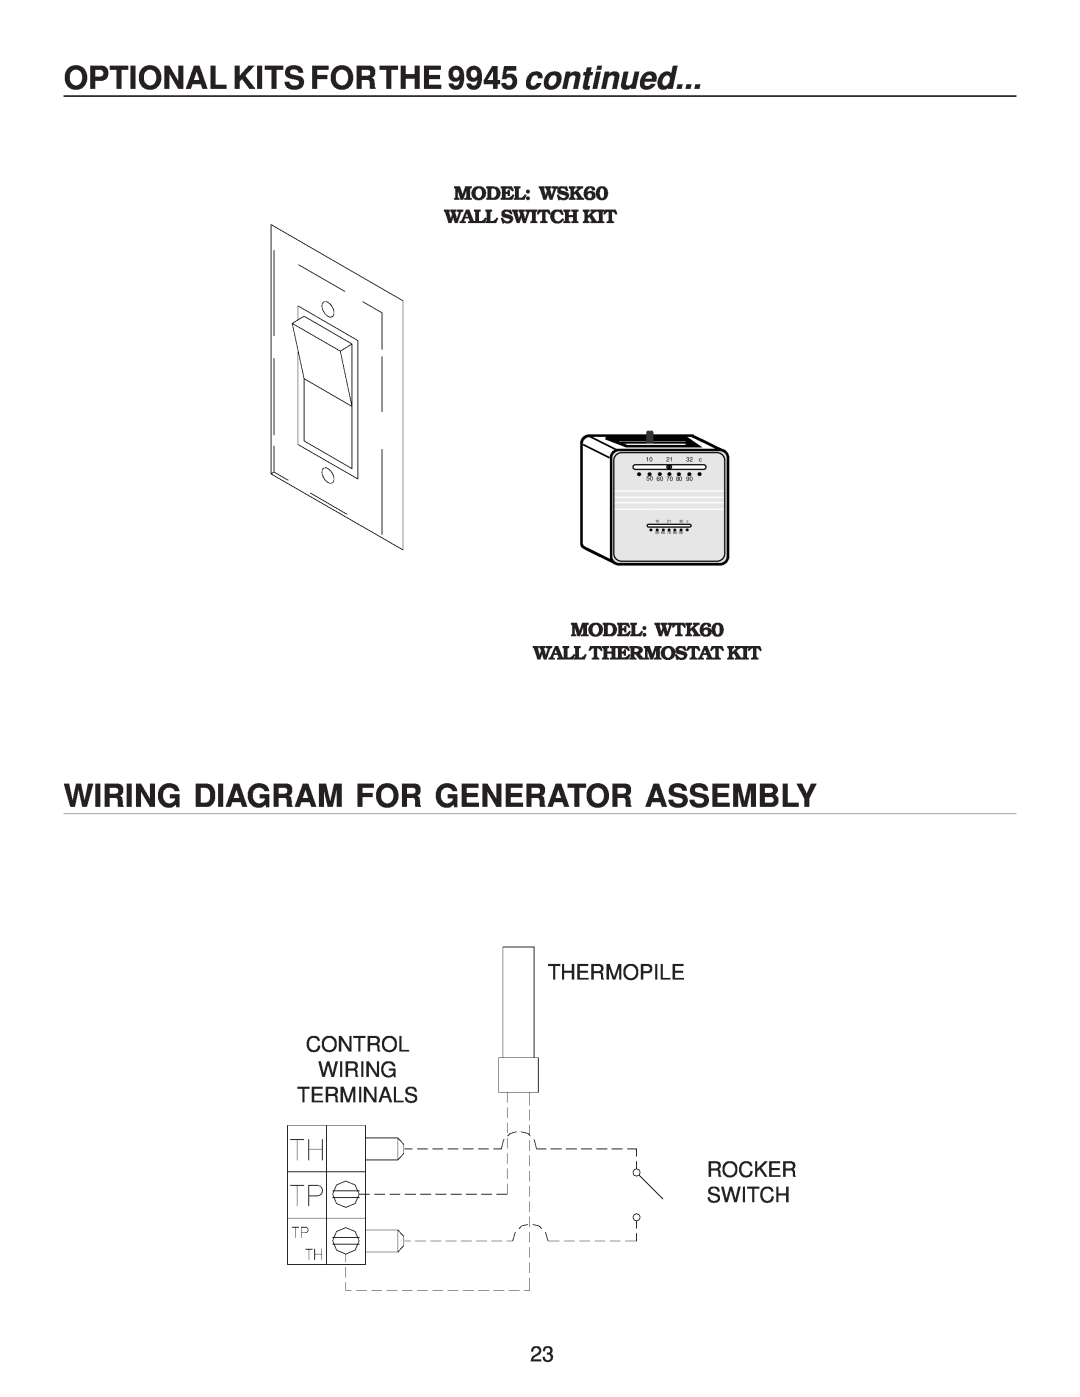 United States Stove B9945L OPTIONAL KITS FORTHE 9945 continued, Wiring Diagram For Generator Assembly, 10 21 32 c 50 60 